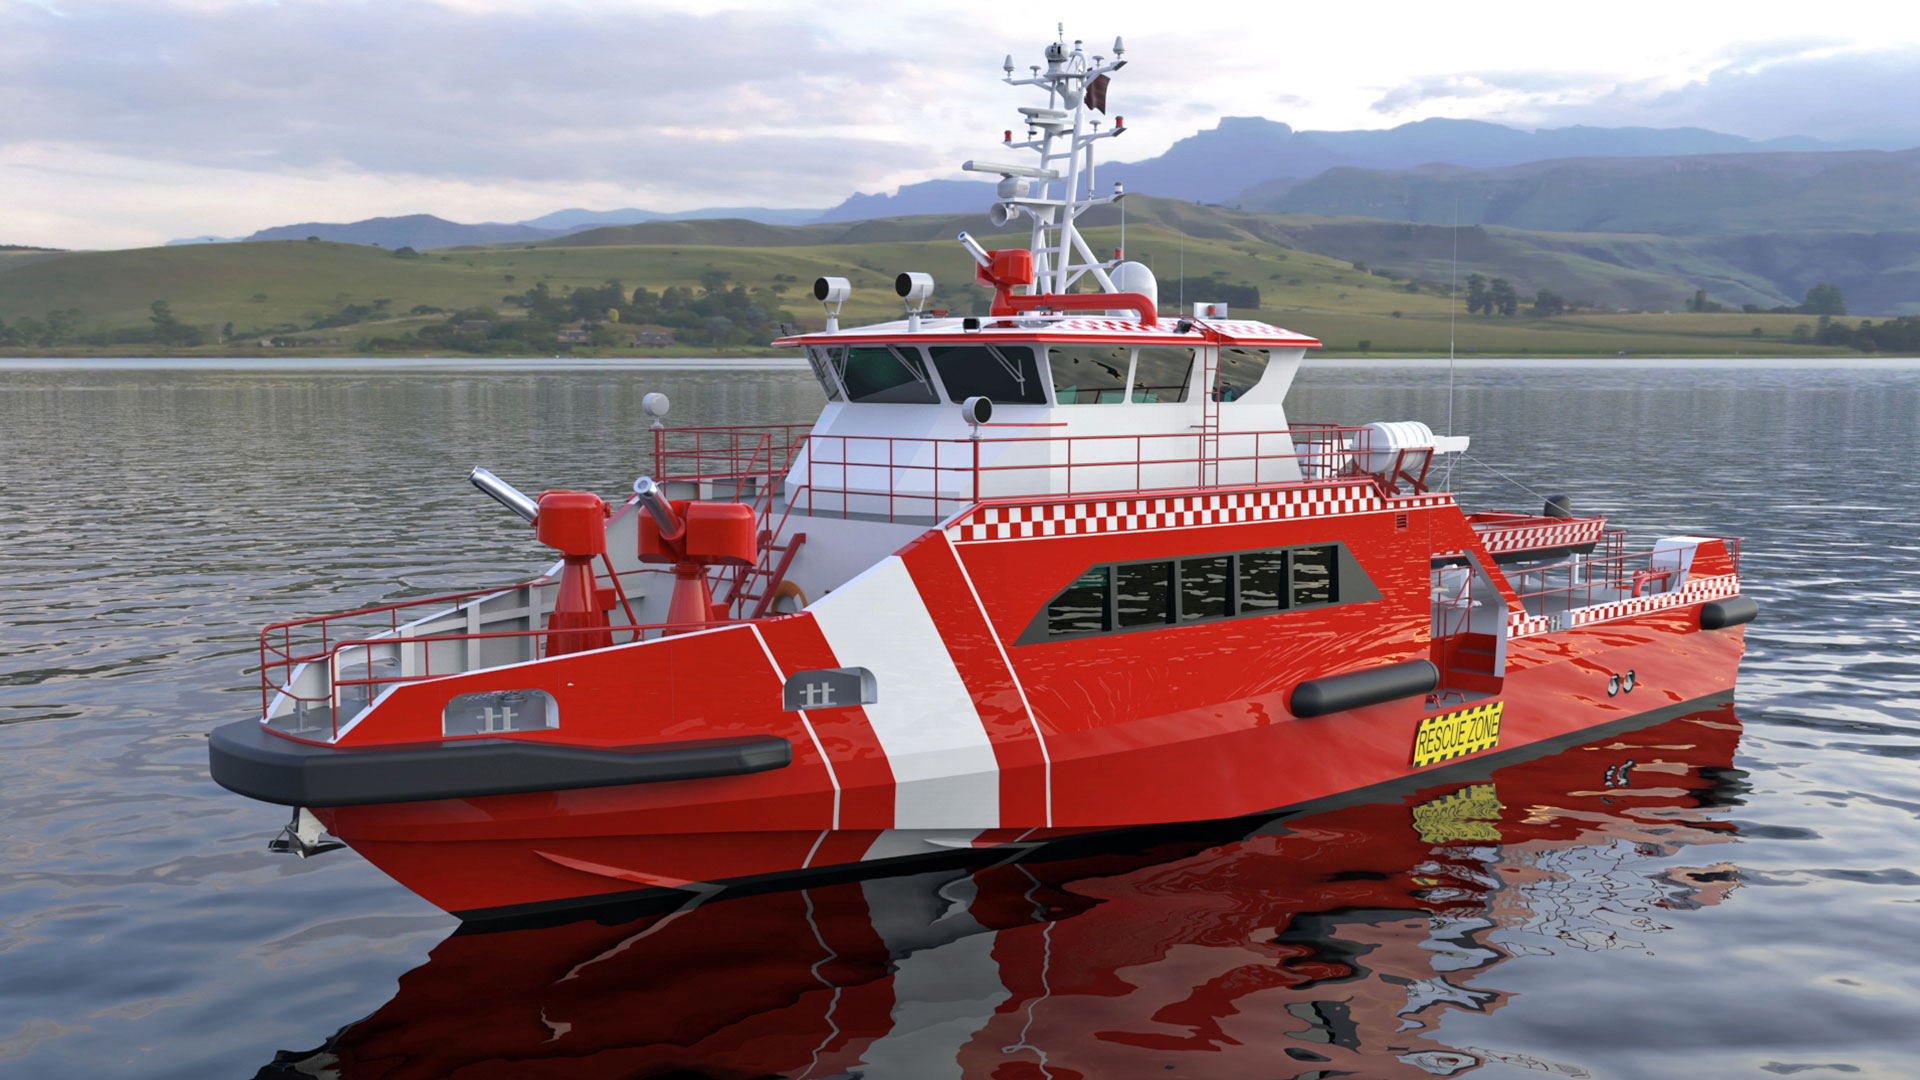 images/vessels/03-utility-support-craft/02-fire-fighting-vessels/03-ares-25-fifi/01_1614086788.jpg